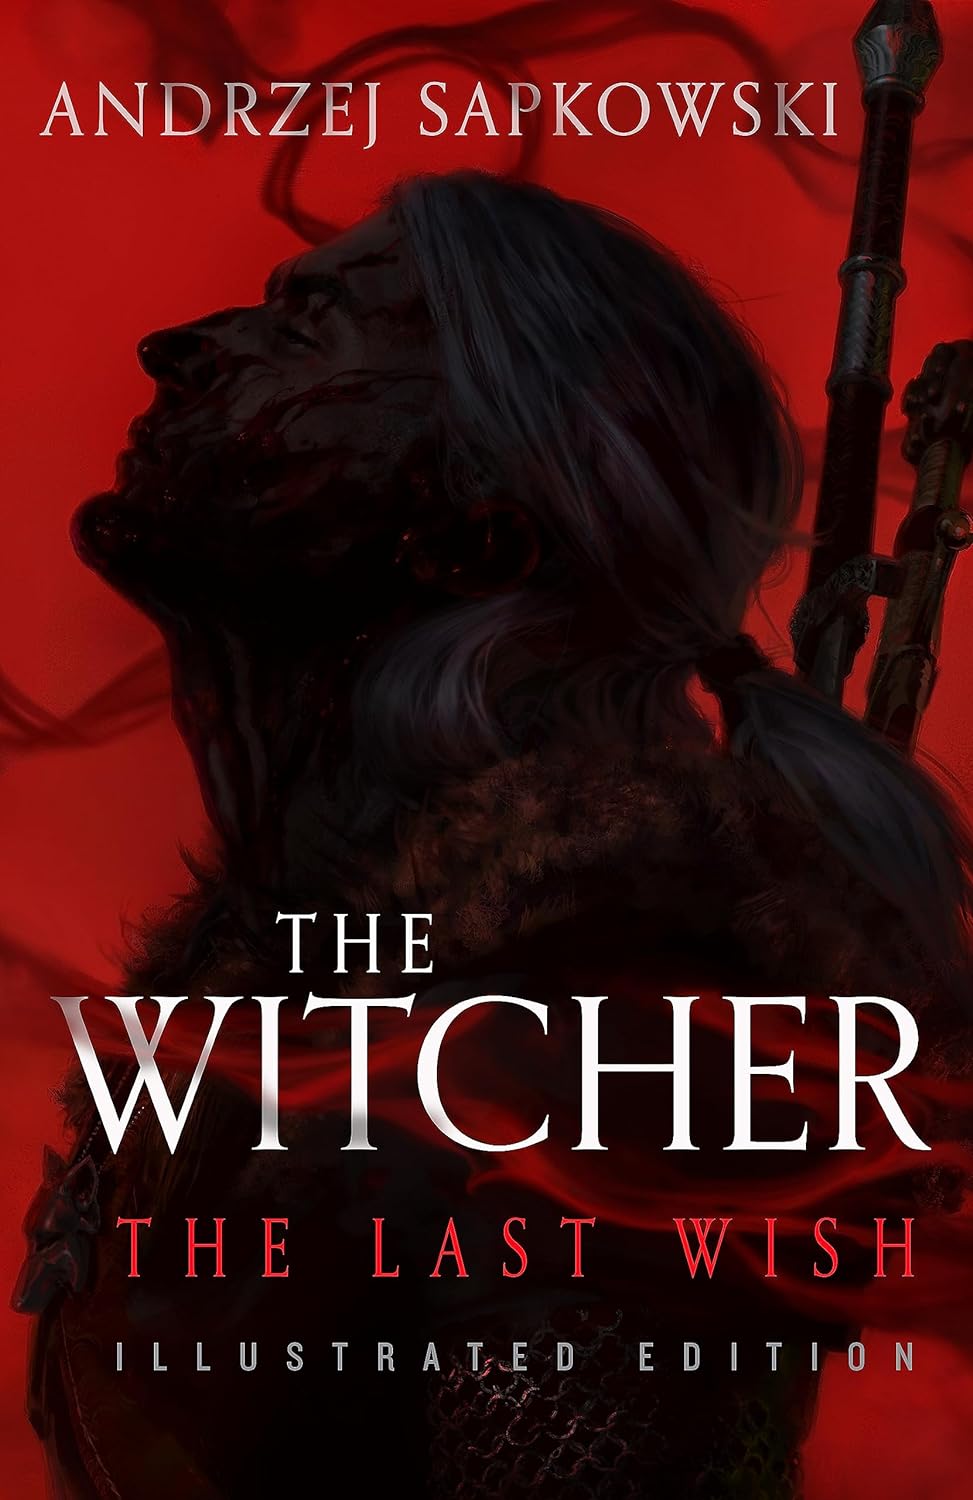 The Witcher: The Last Wish - Illustrated Edition